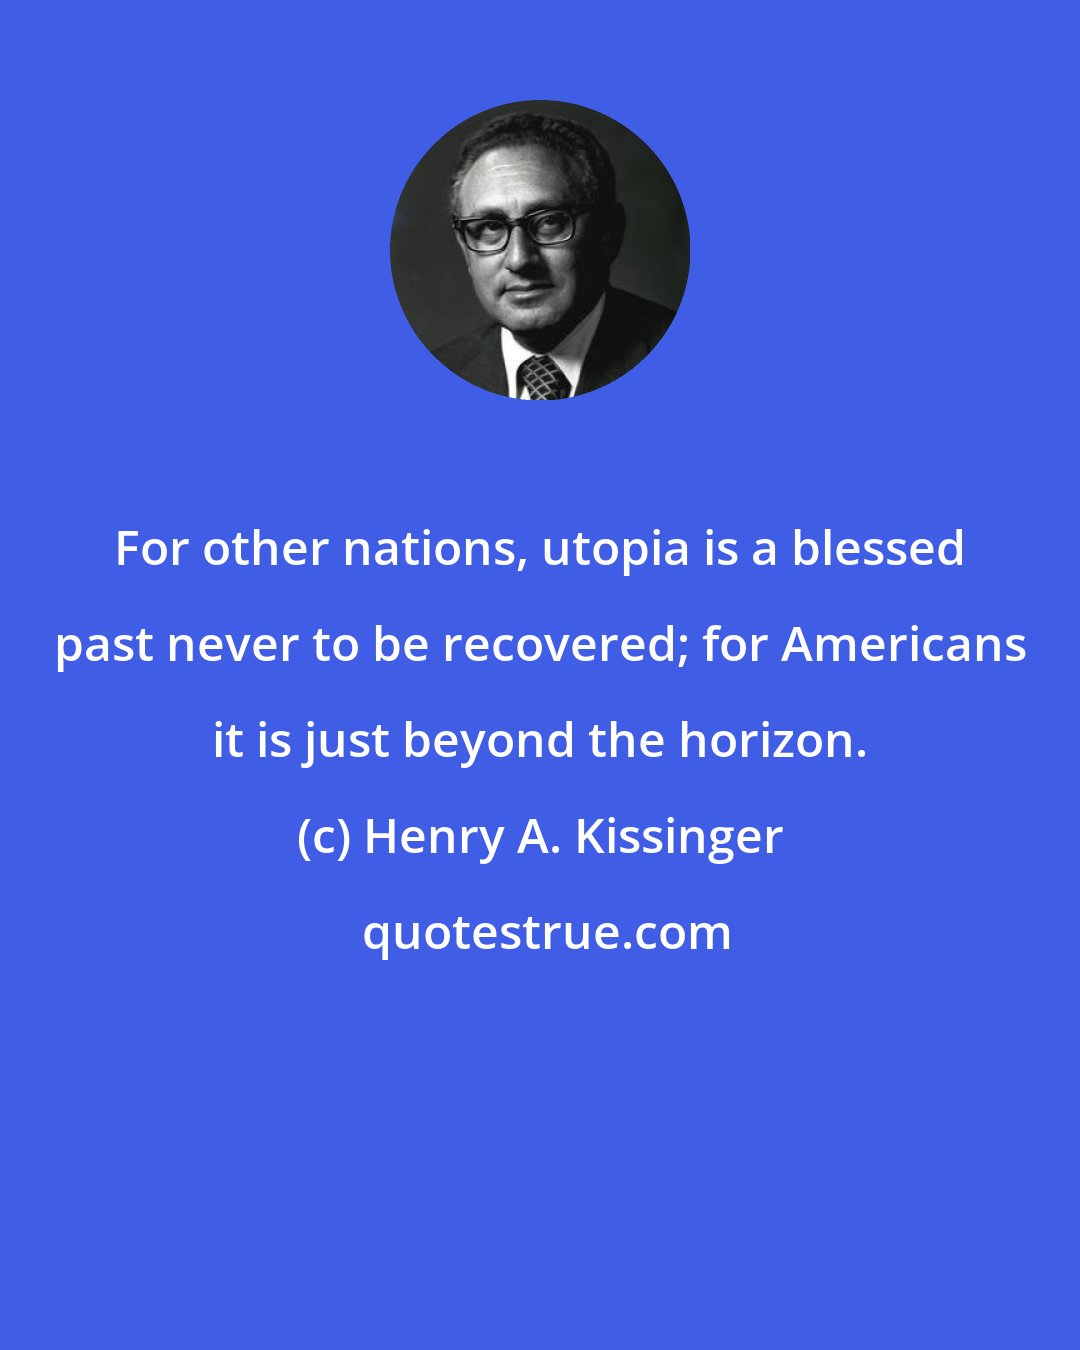 Henry A. Kissinger: For other nations, utopia is a blessed past never to be recovered; for Americans it is just beyond the horizon.